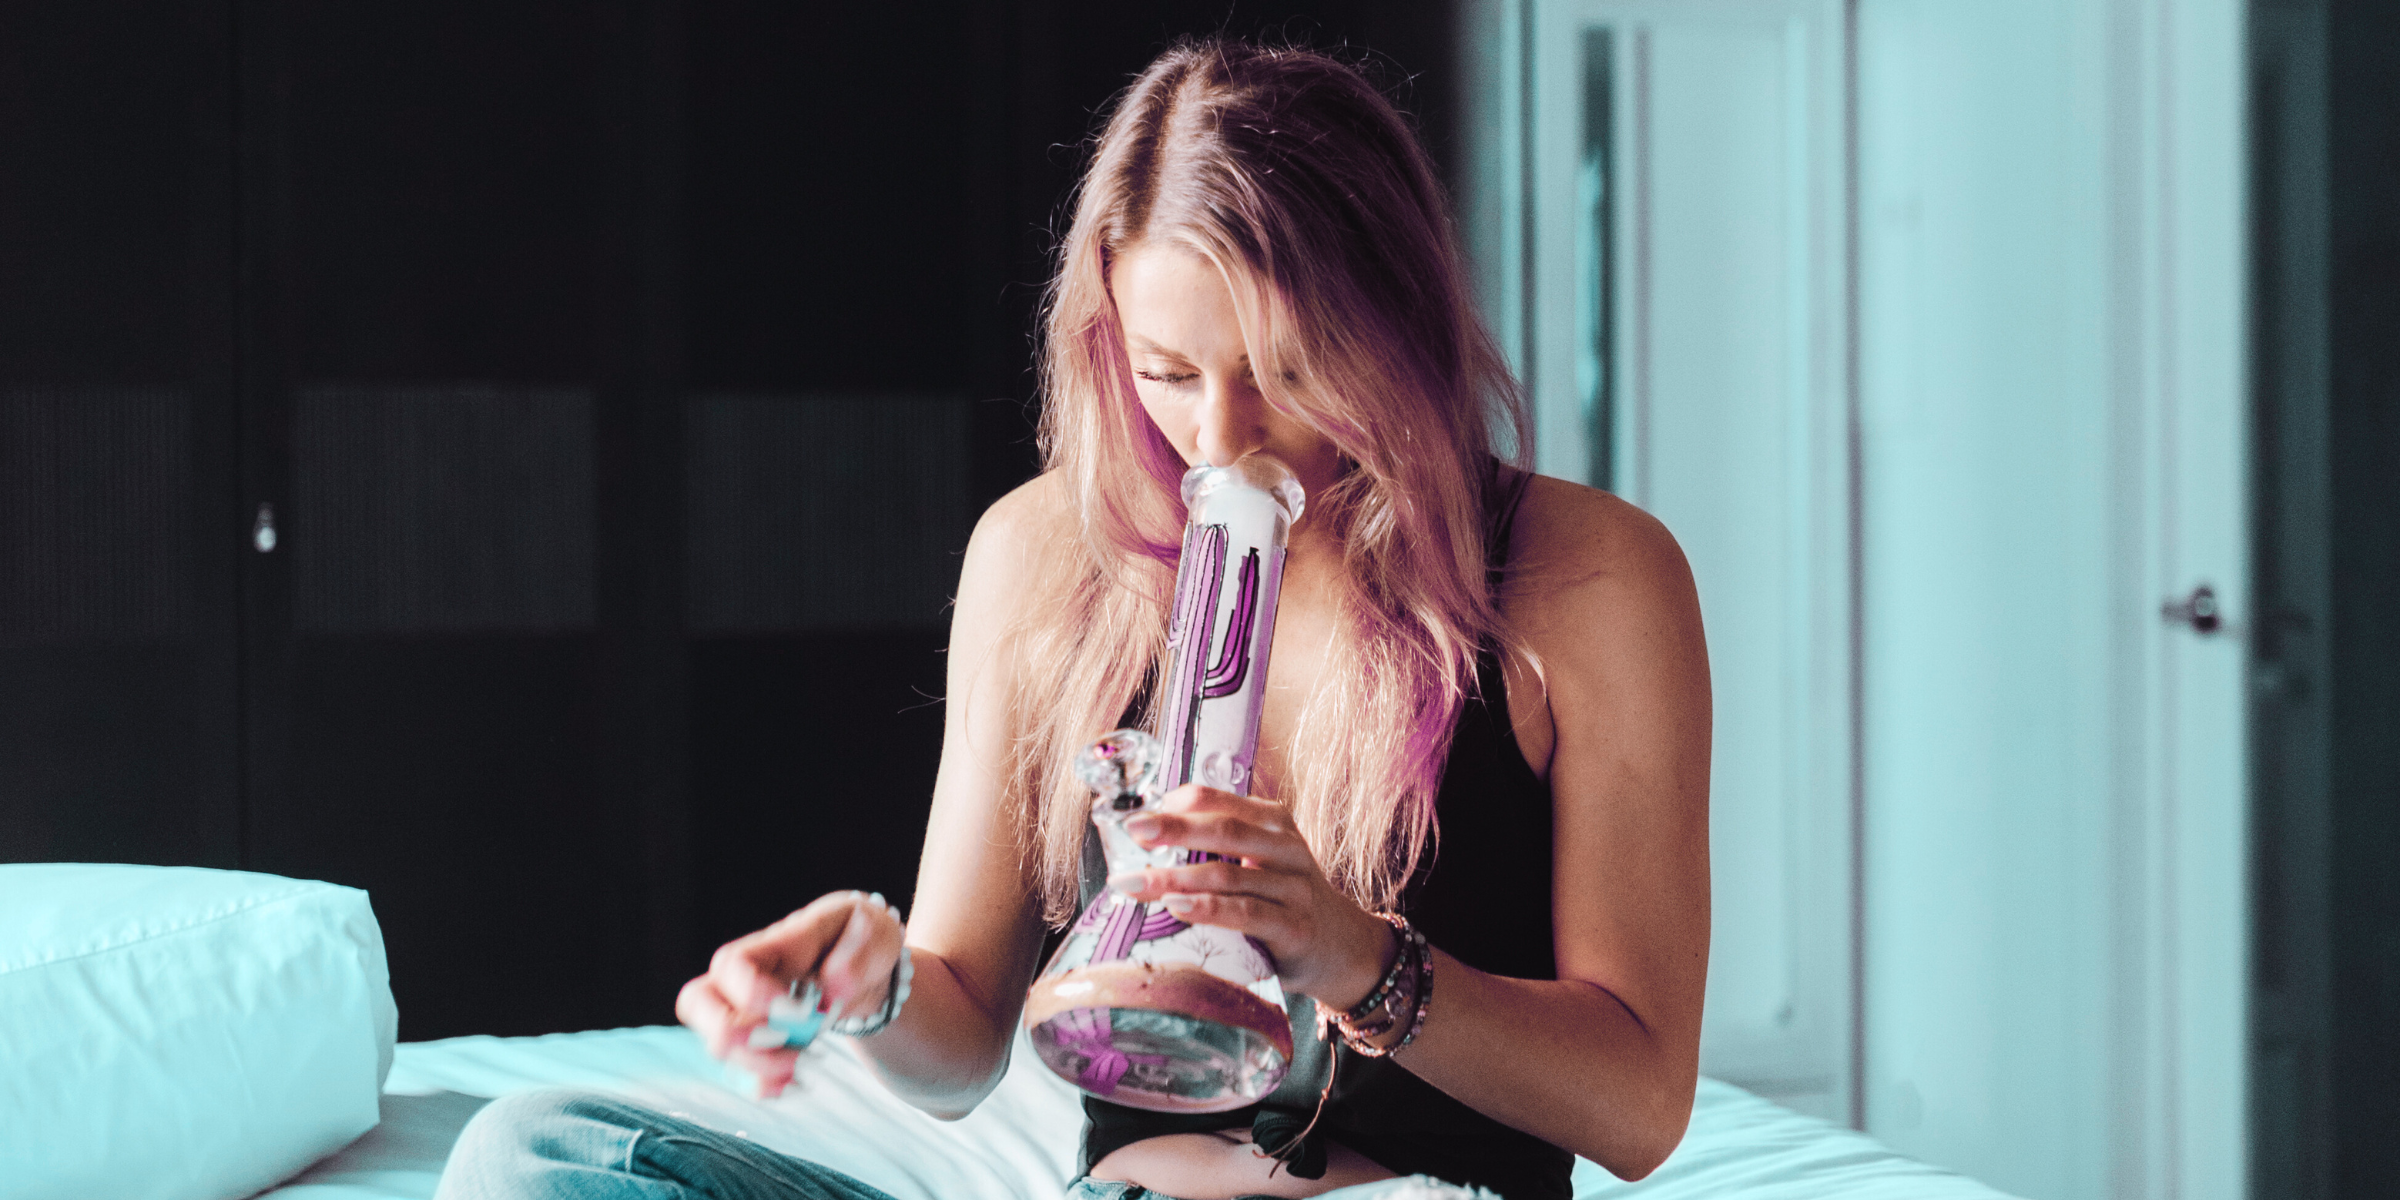 woman smoking cannabis in her bedroom out of glass cactus bong